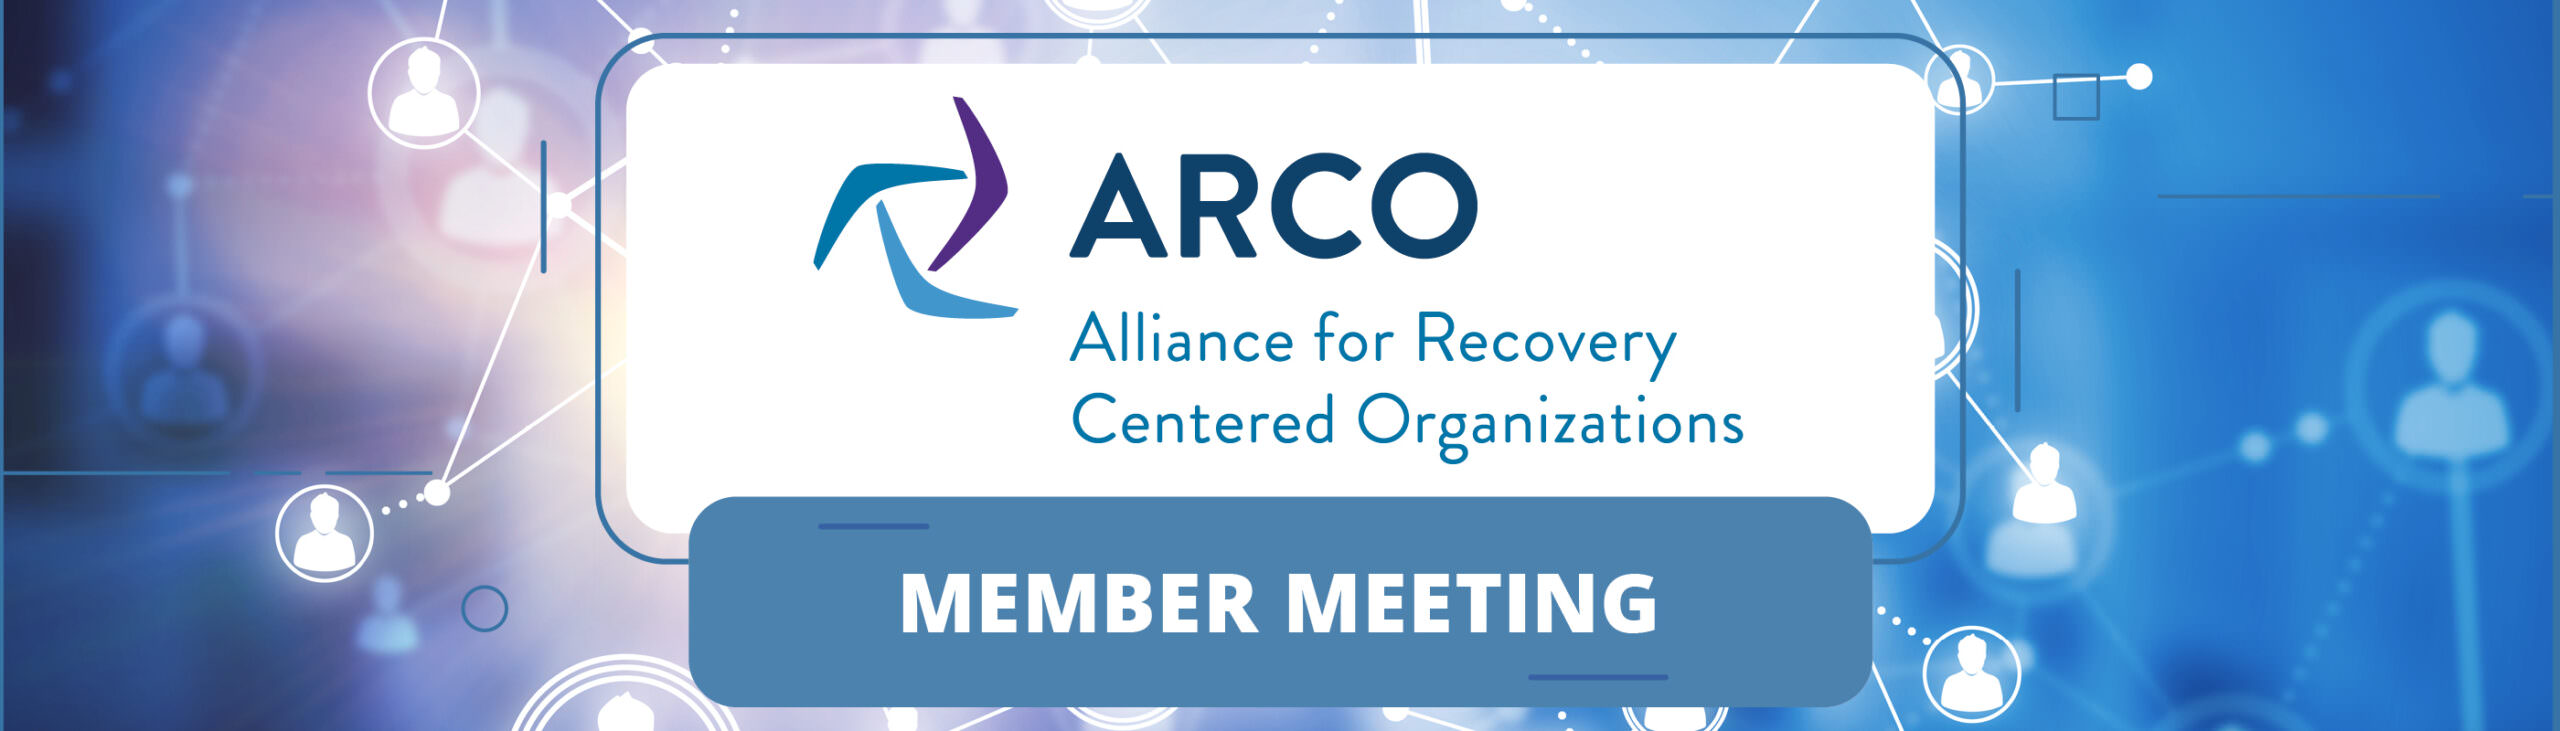 ARCO meeting featured image for events calendar